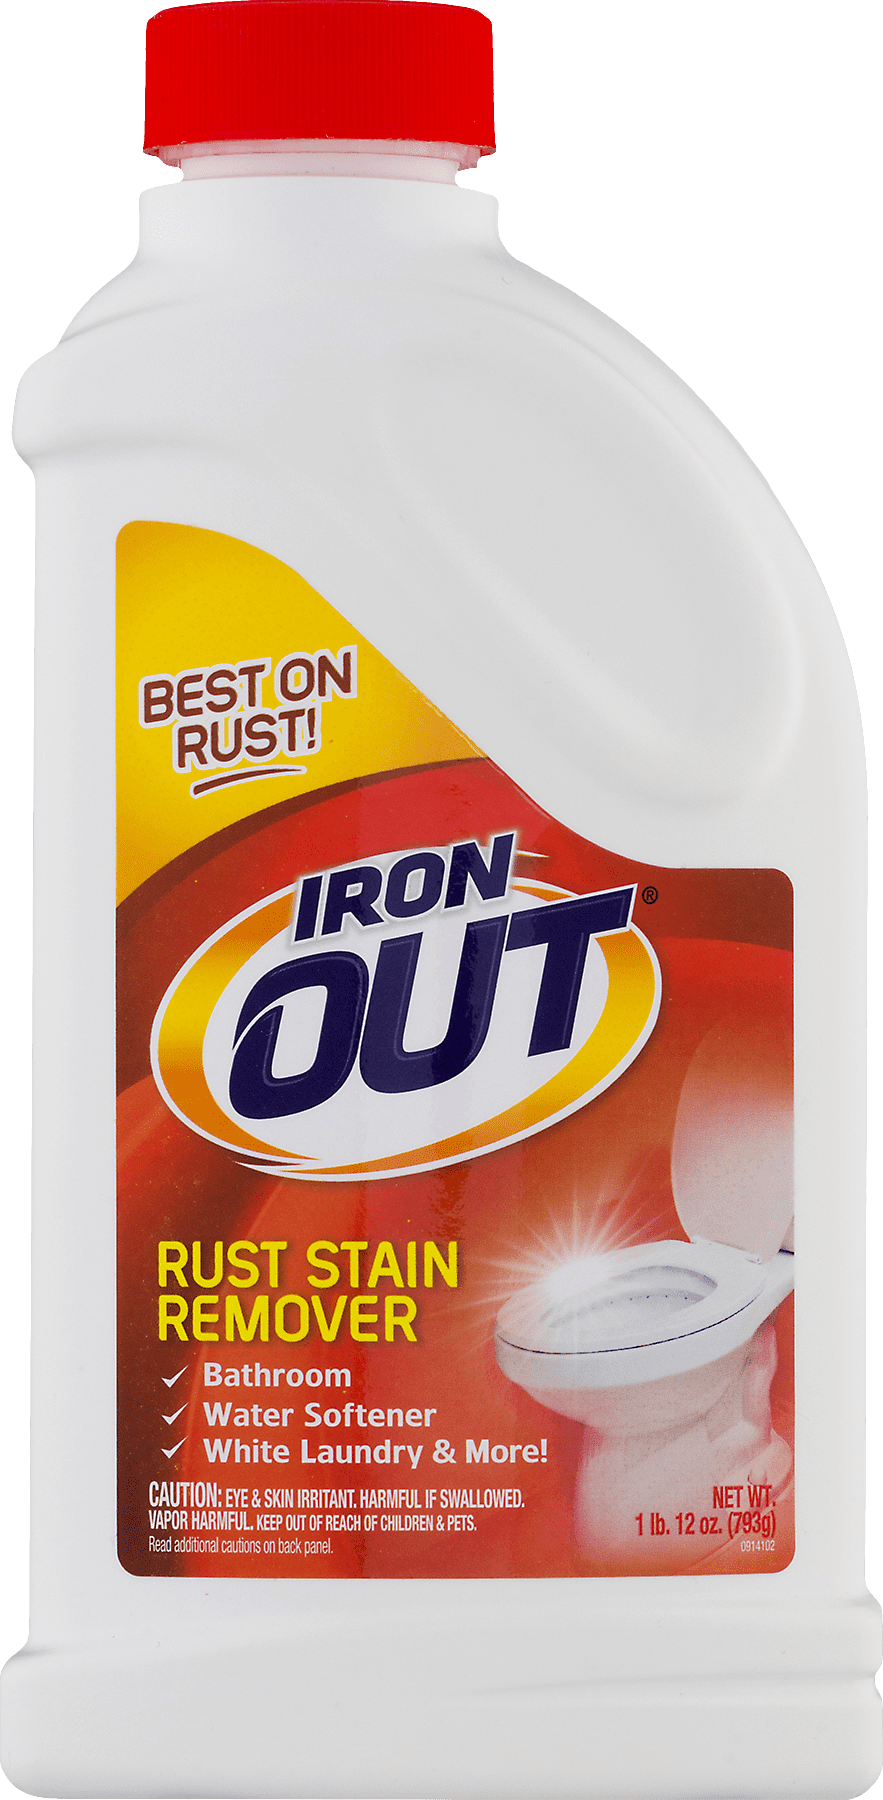 Clean a rust stain фото 83